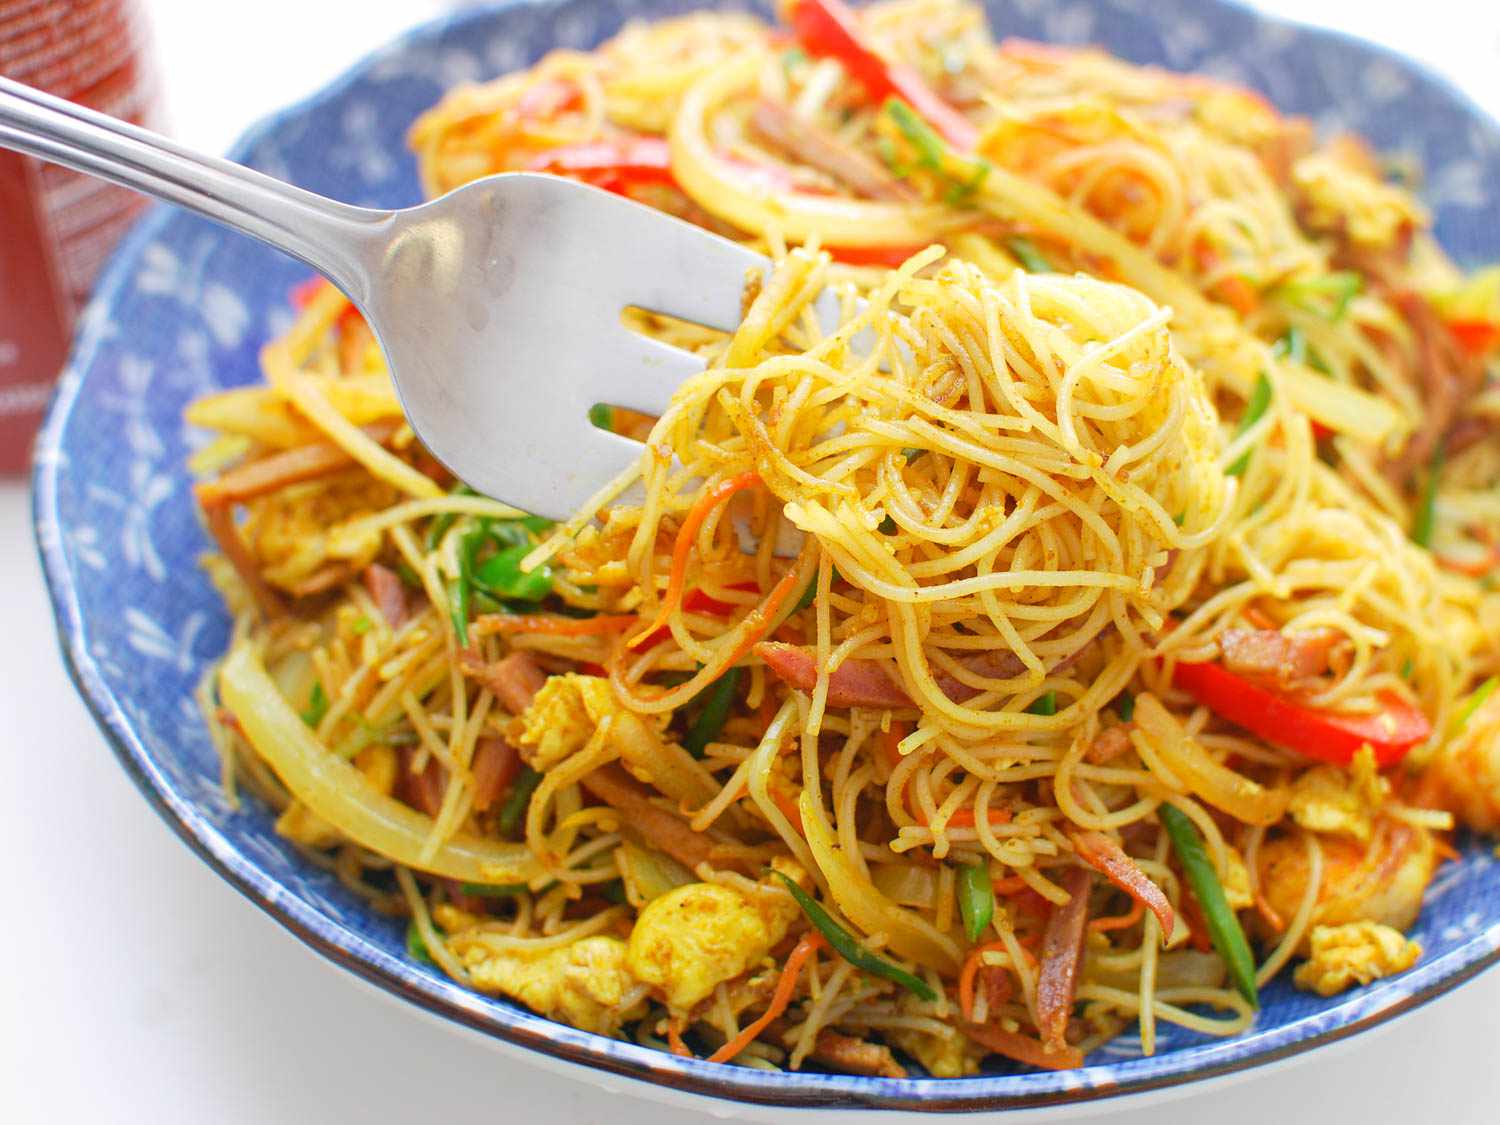 A fork twirling Singapore rice noodles from a bowl.